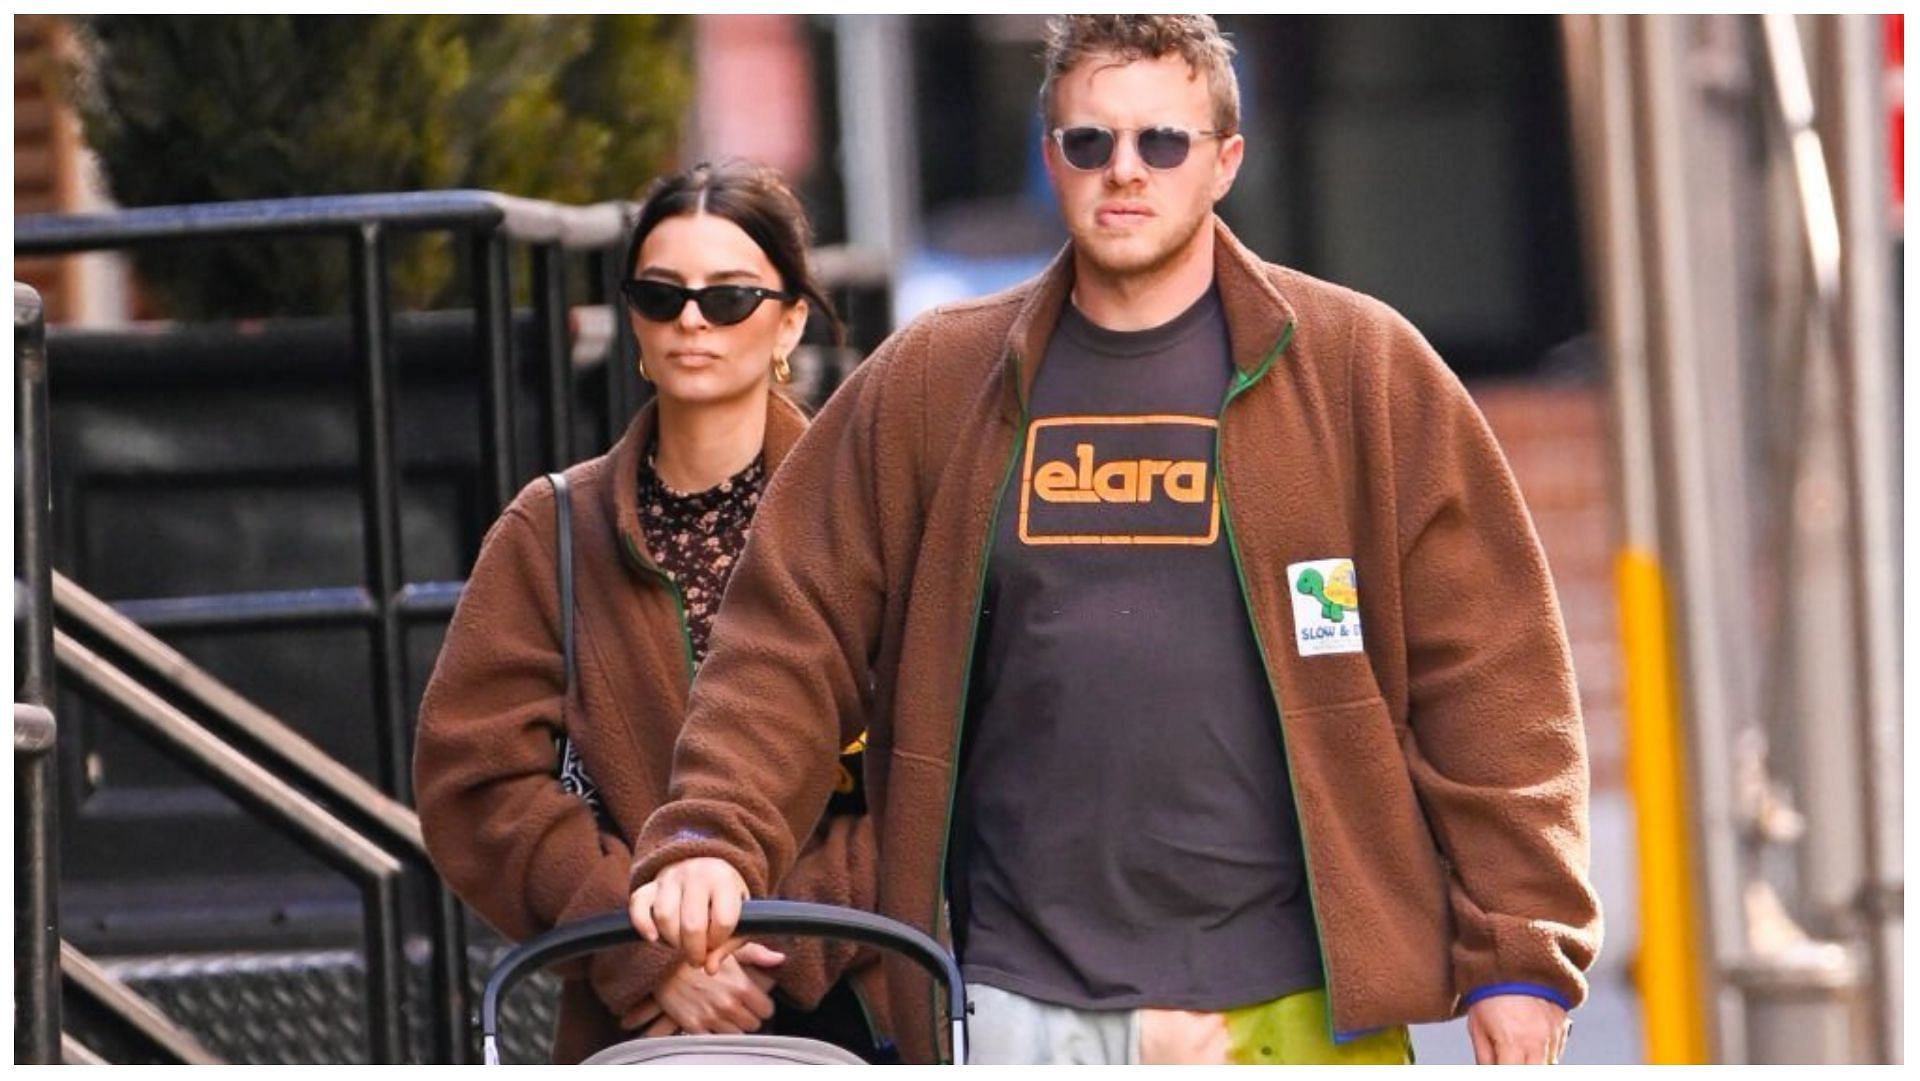 Emily Ratajkowski and Sebastian Bear-McClard are getting divorced after being married for four years (Image via Raymond Hall/Getty Images)